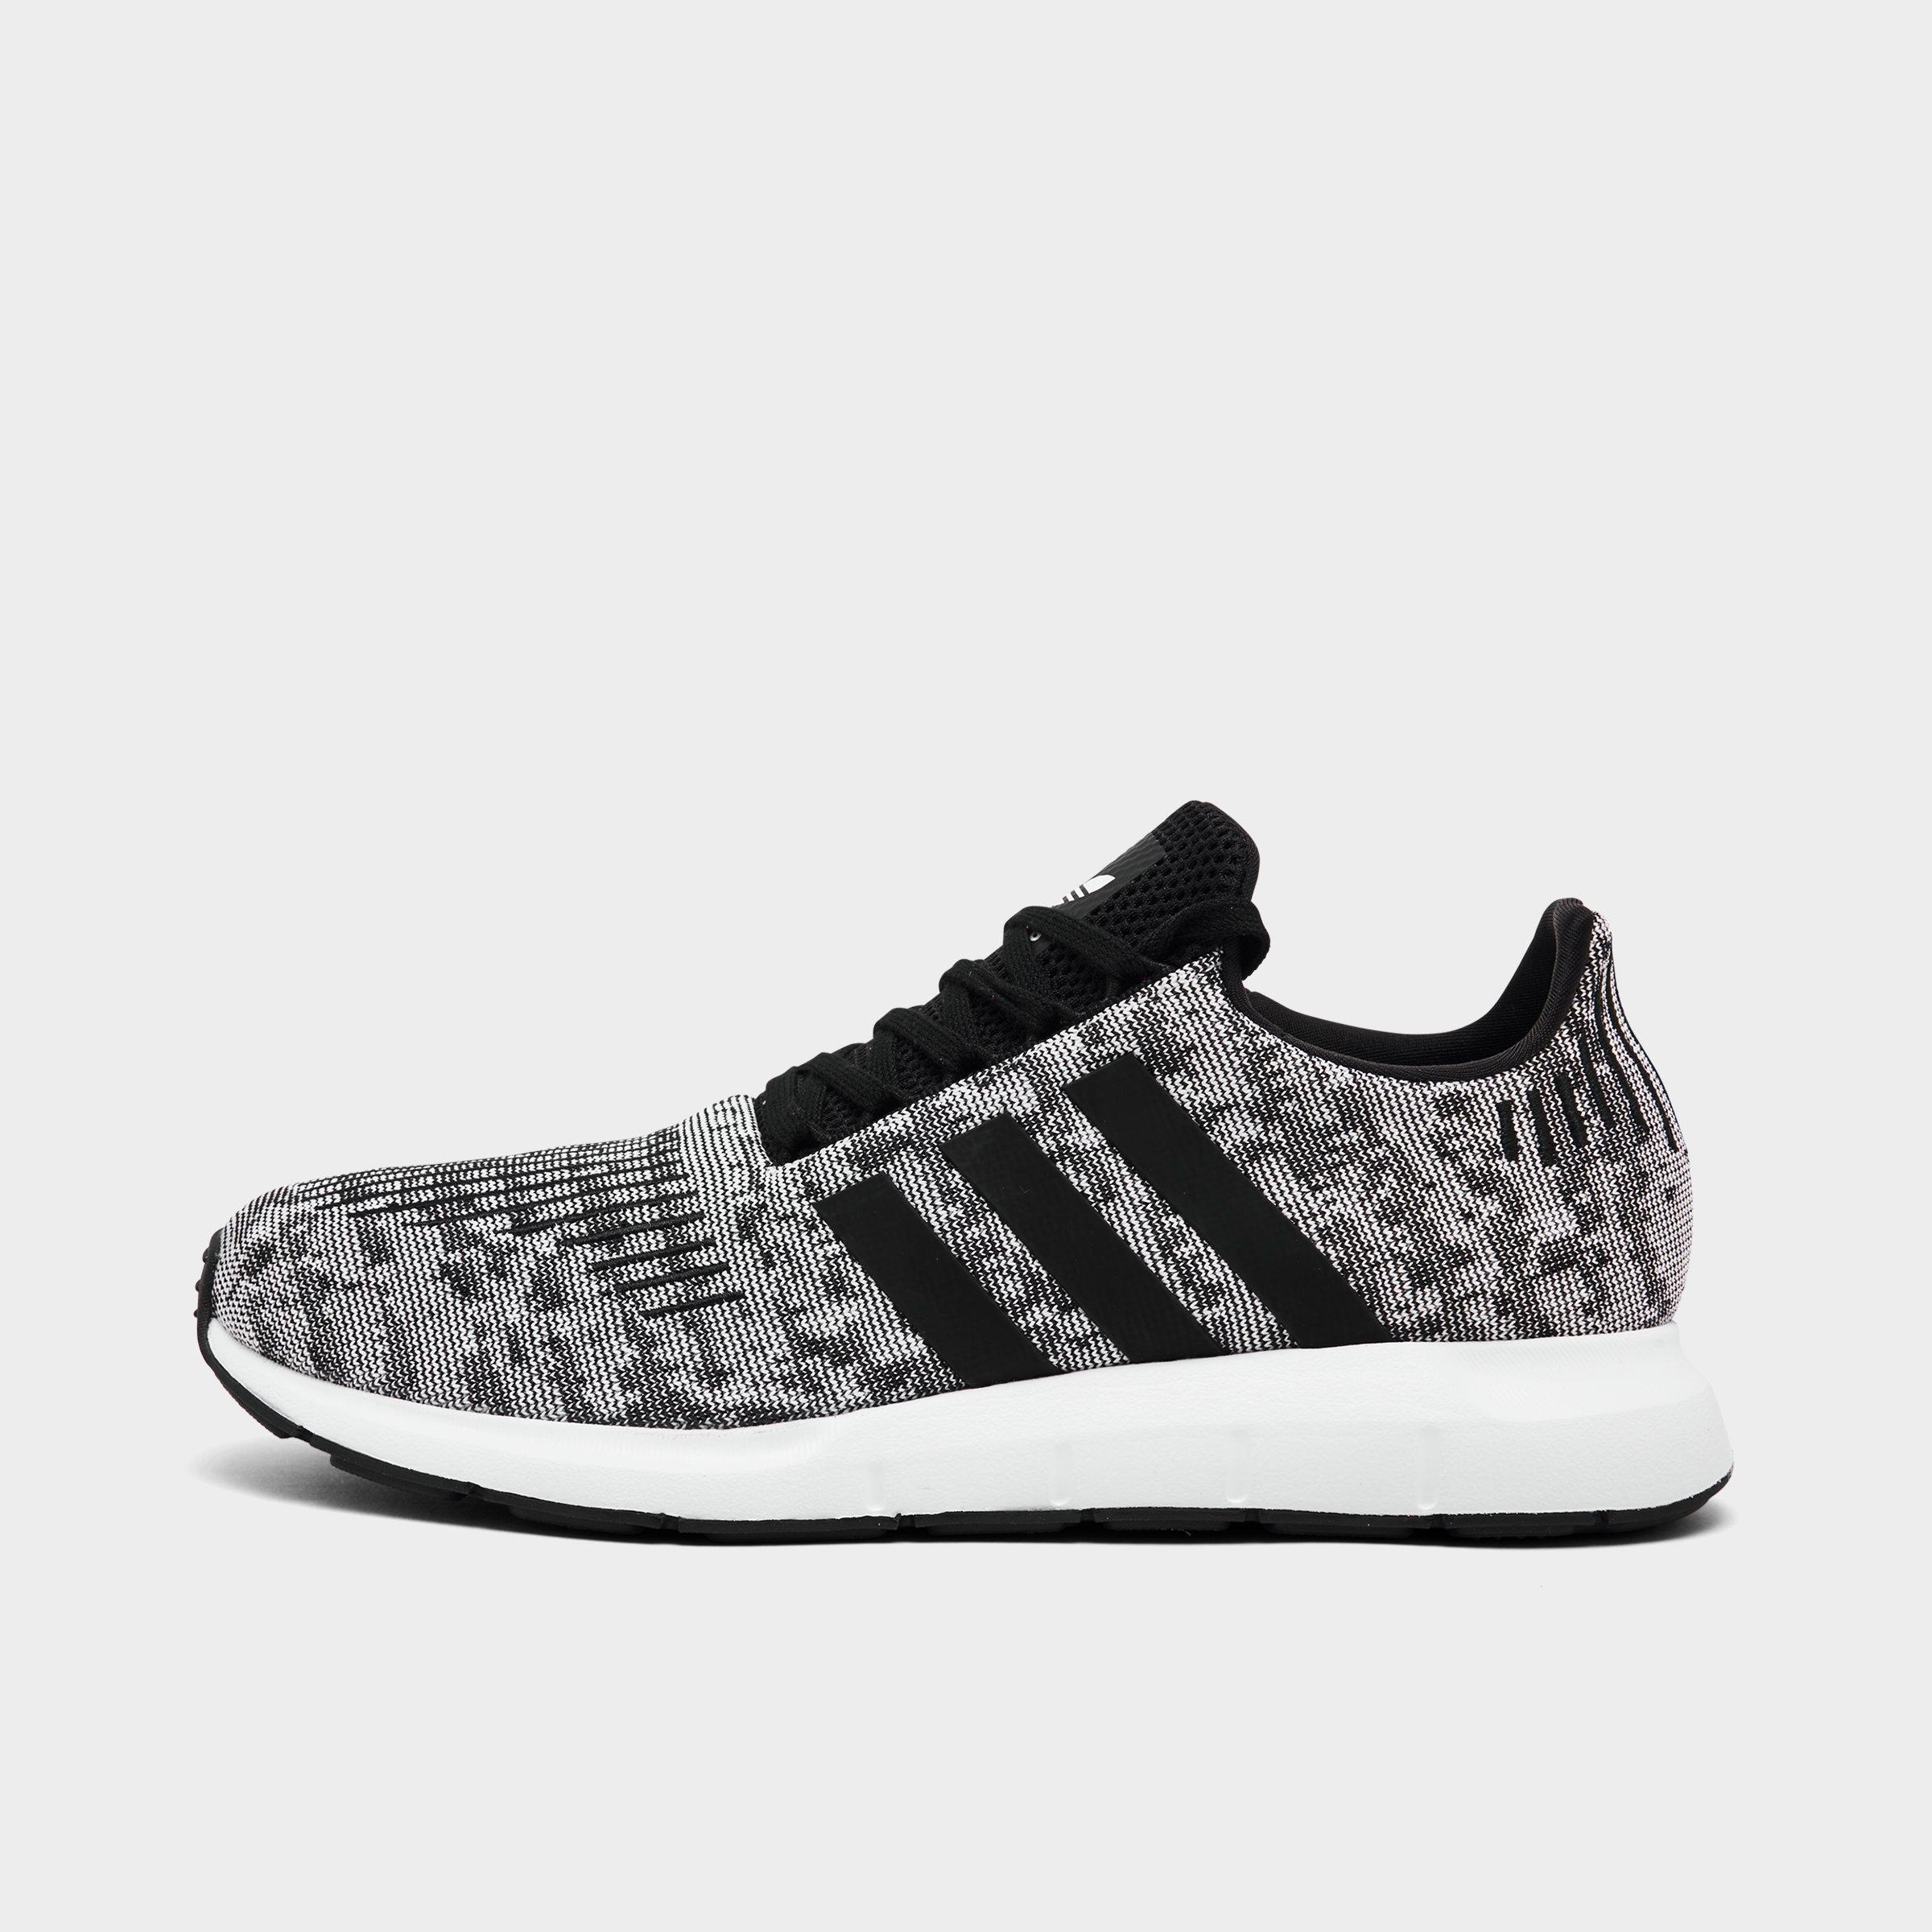 sports shoes for men adidas